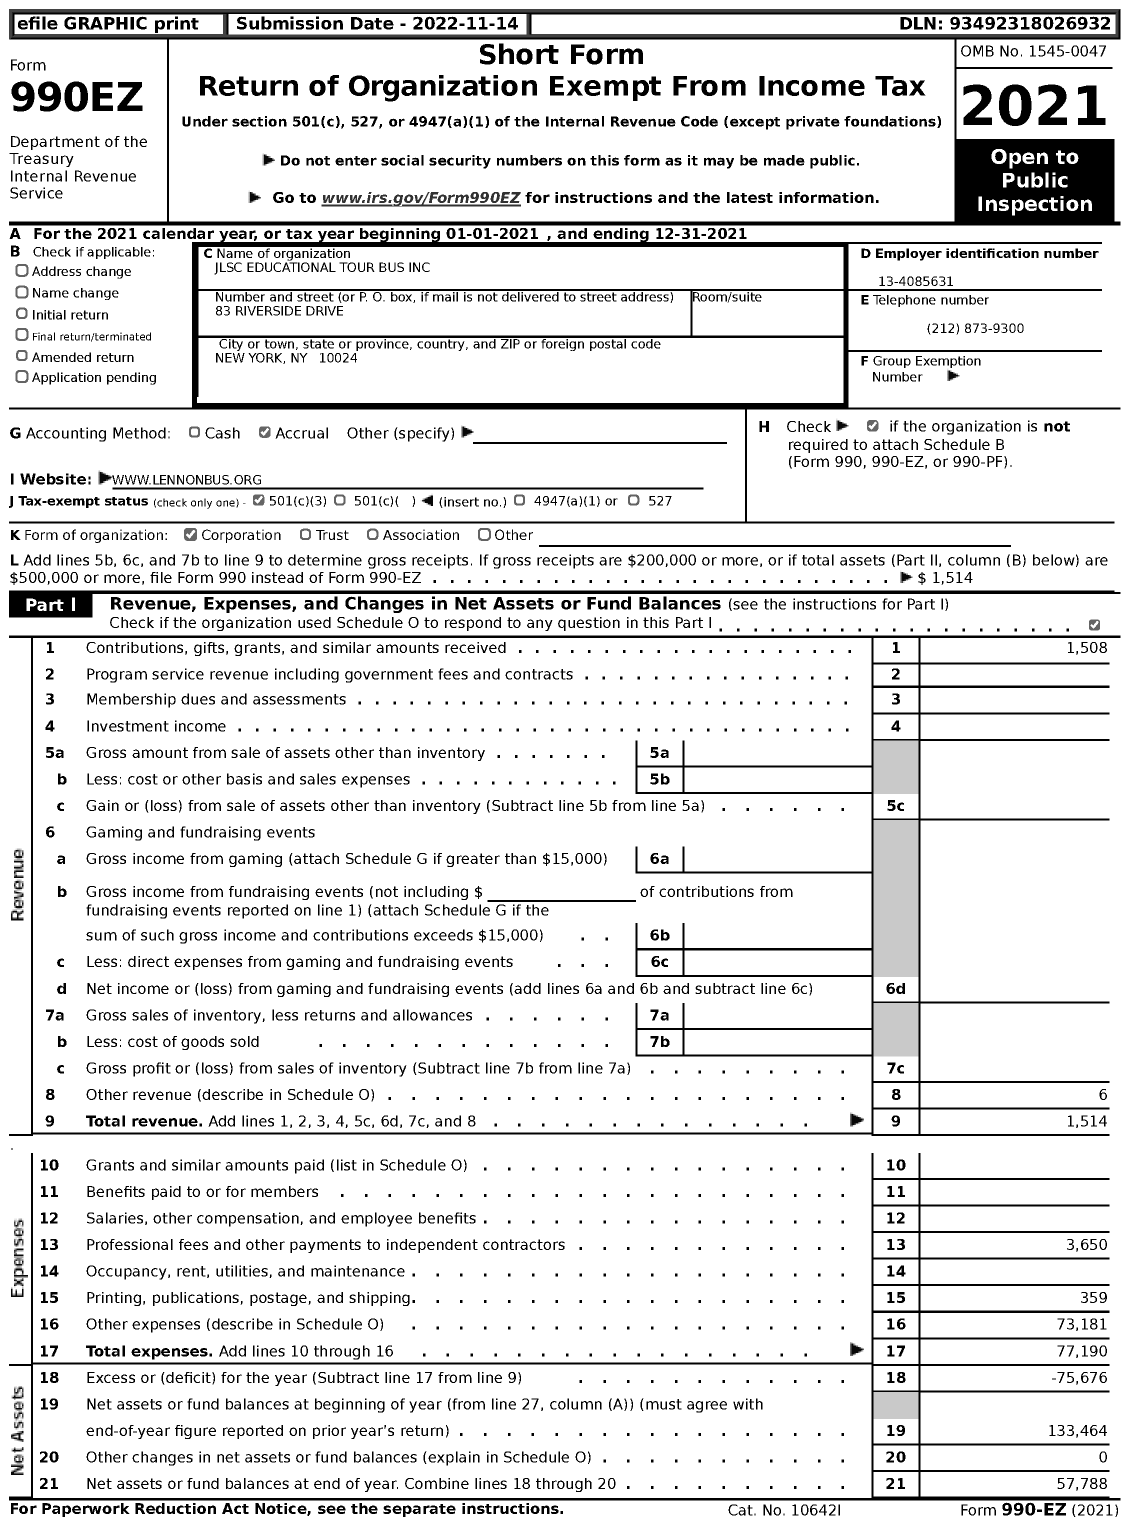 Image of first page of 2021 Form 990EZ for JLSC Educational Tour Bus